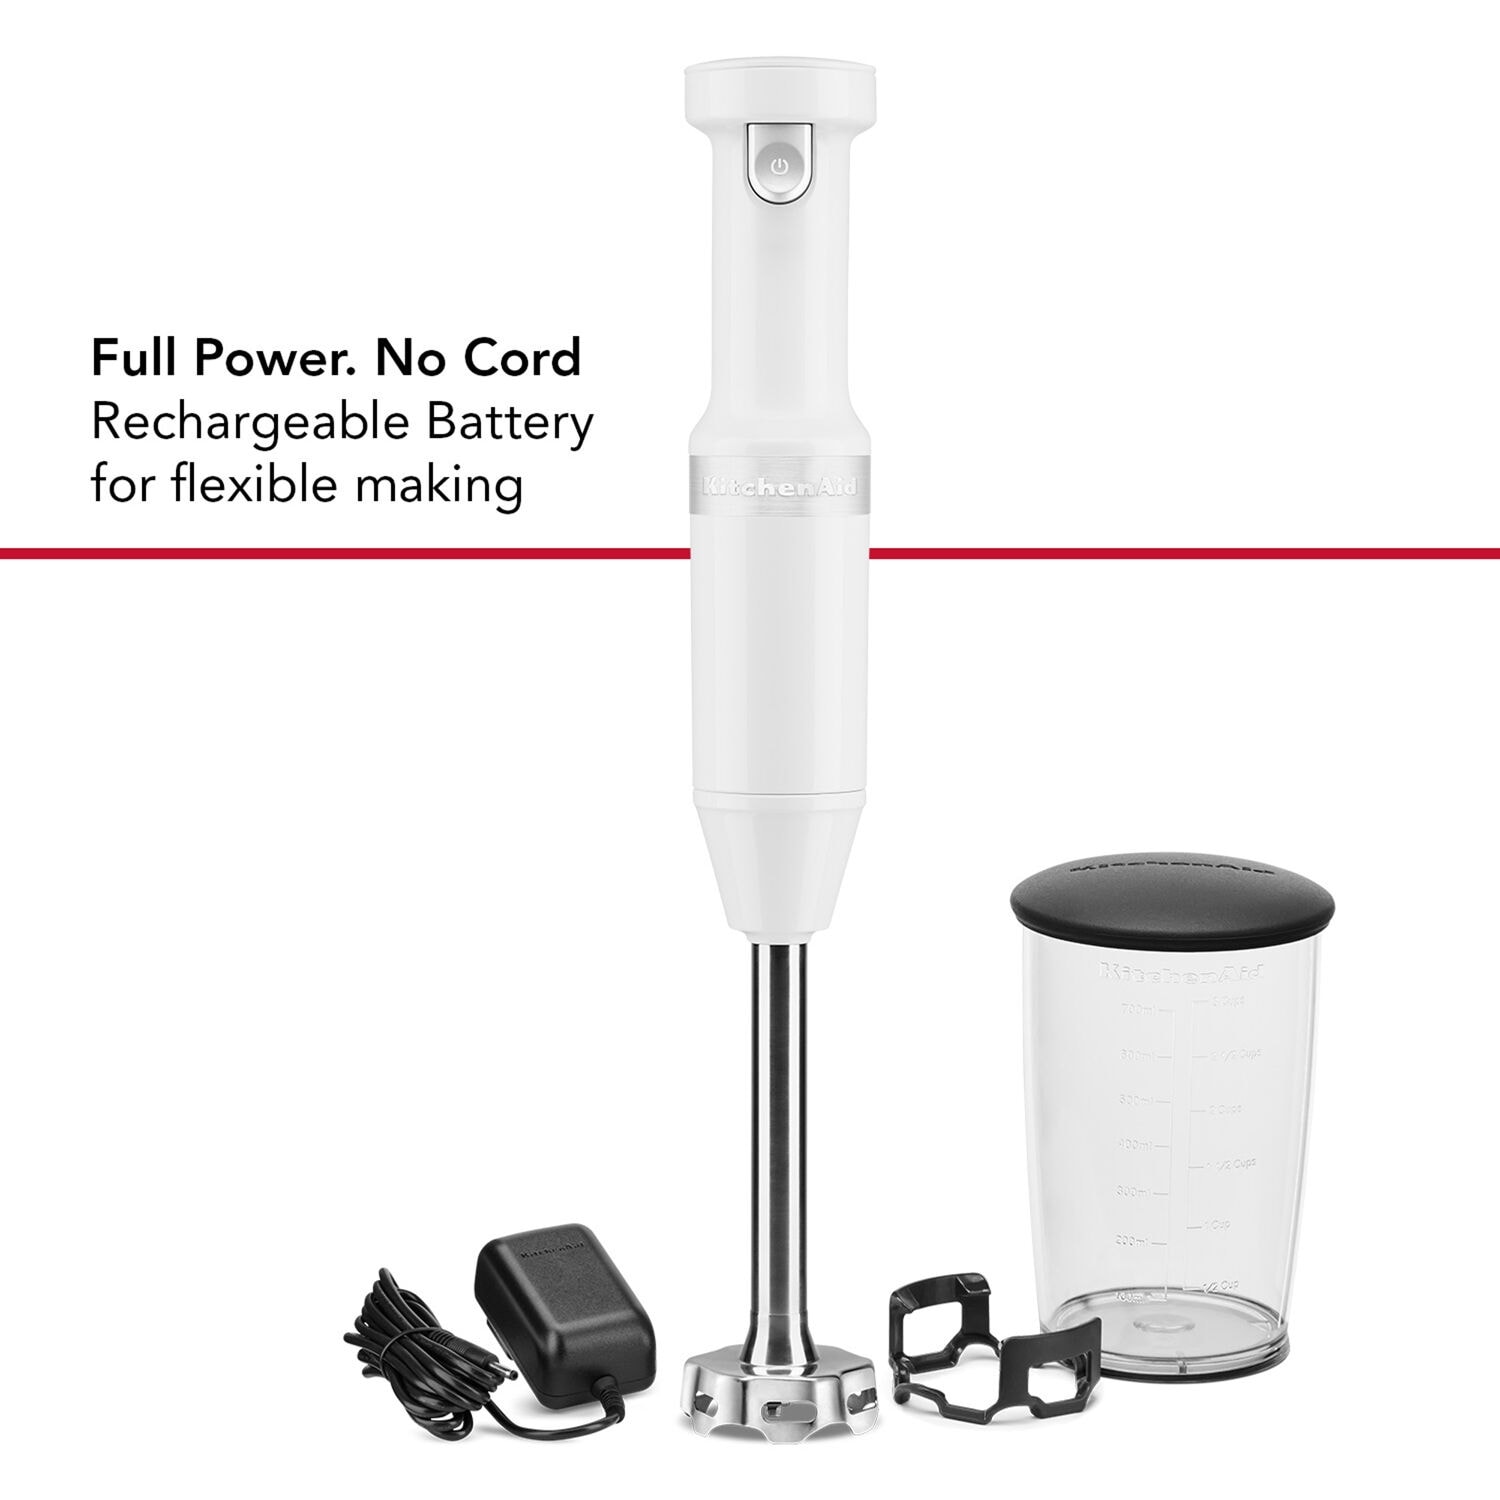 KitchenAid Corded Variable-Speed Immersion Blender in Aqua Sky